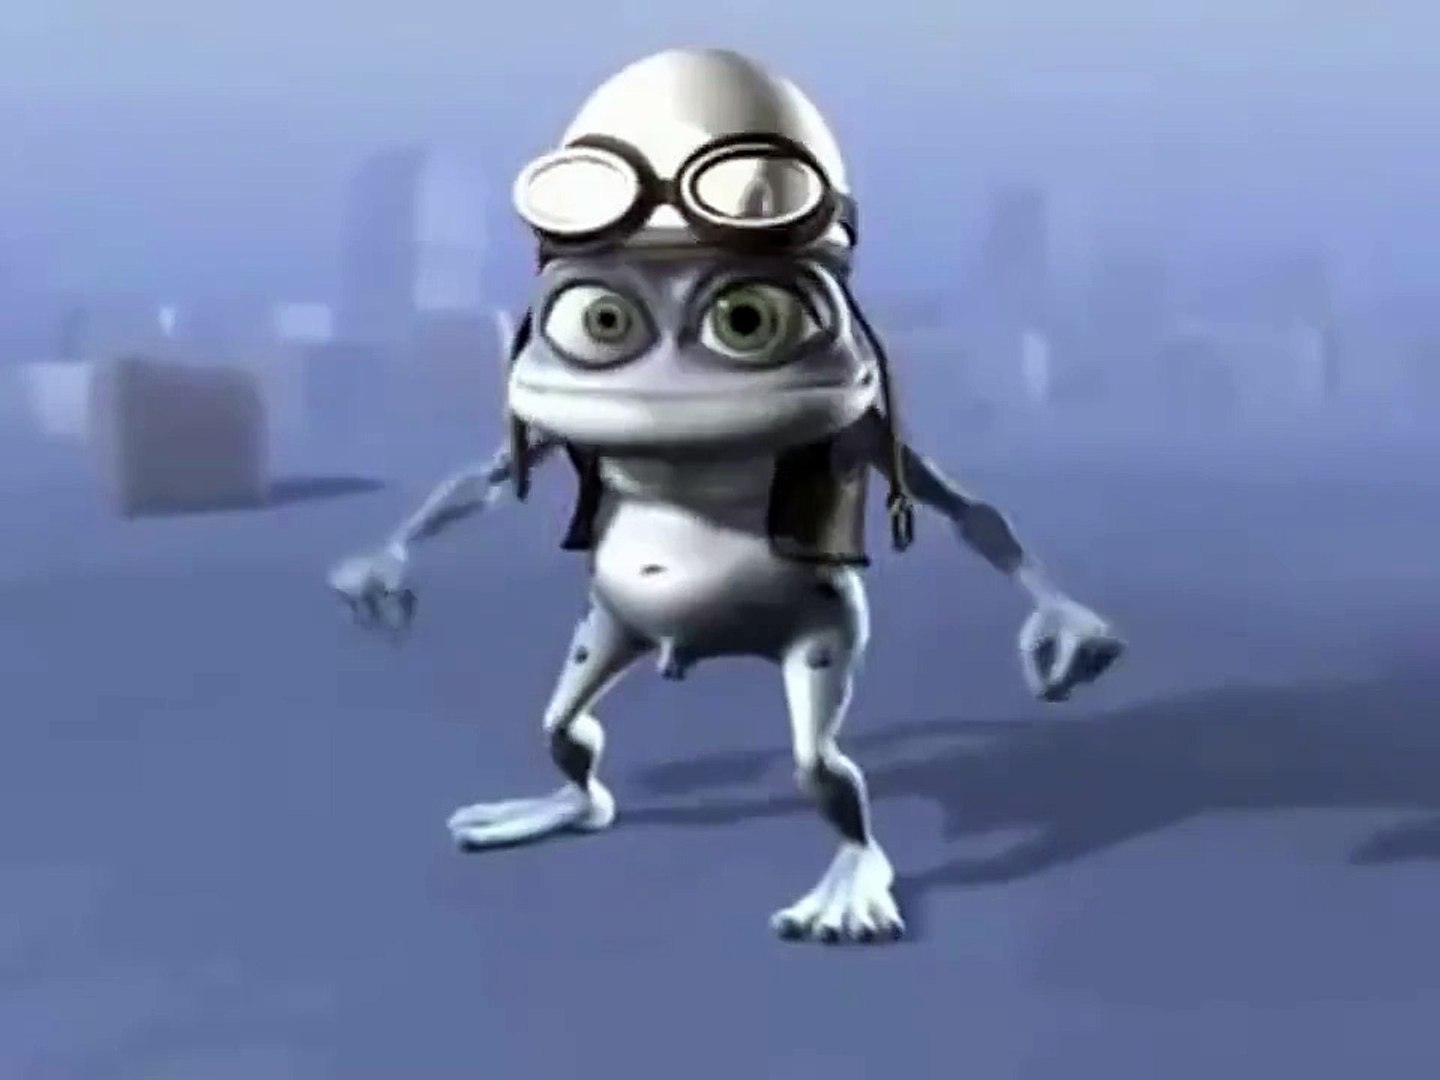 Crazy Frog The Original Crazy Frog Song HD Quality! - Dailymotion Video